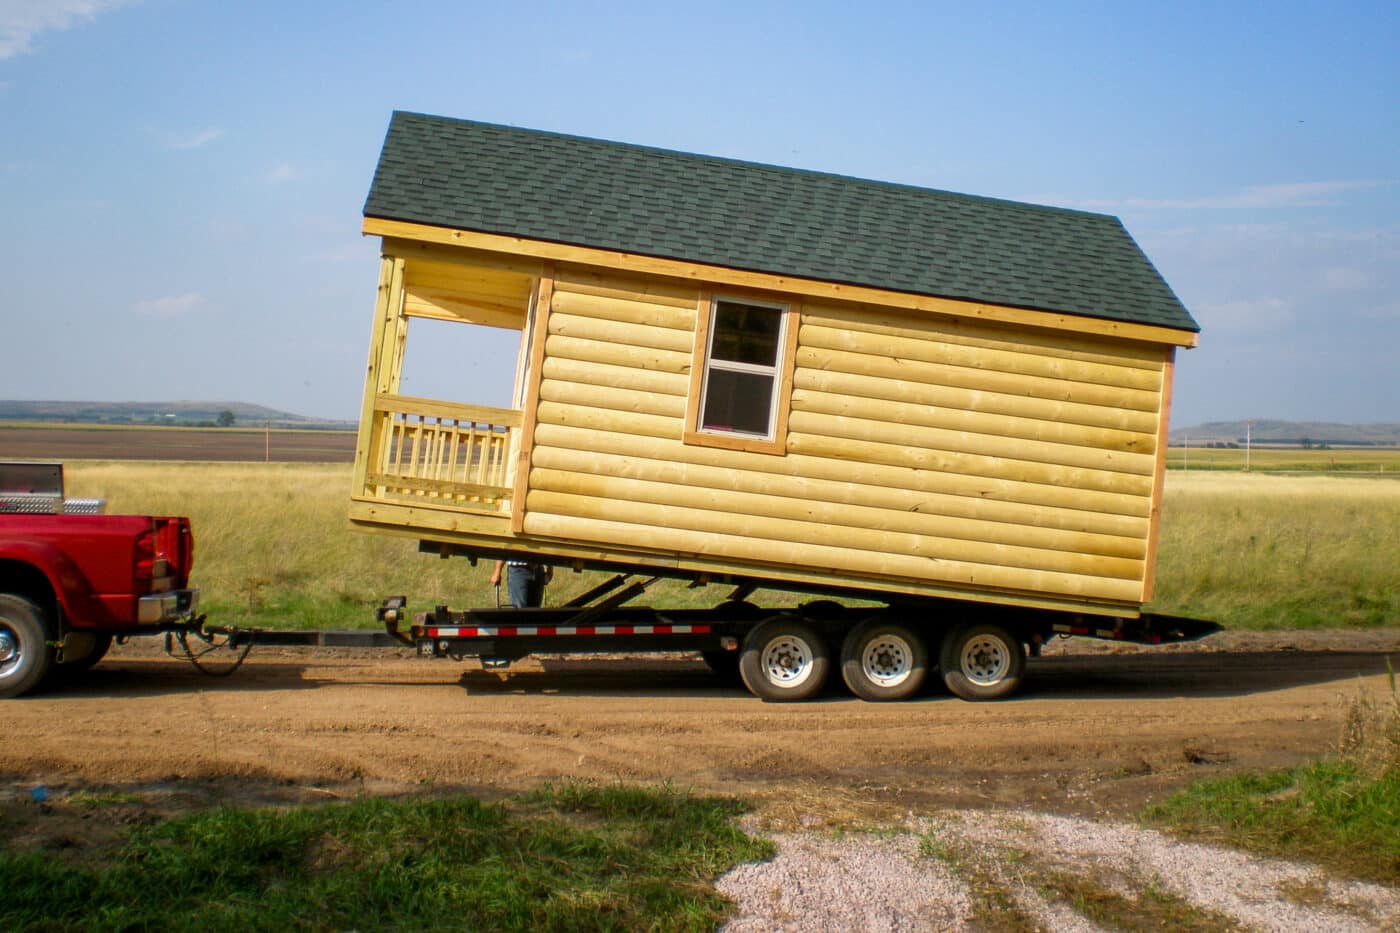 Cabin on truck bed